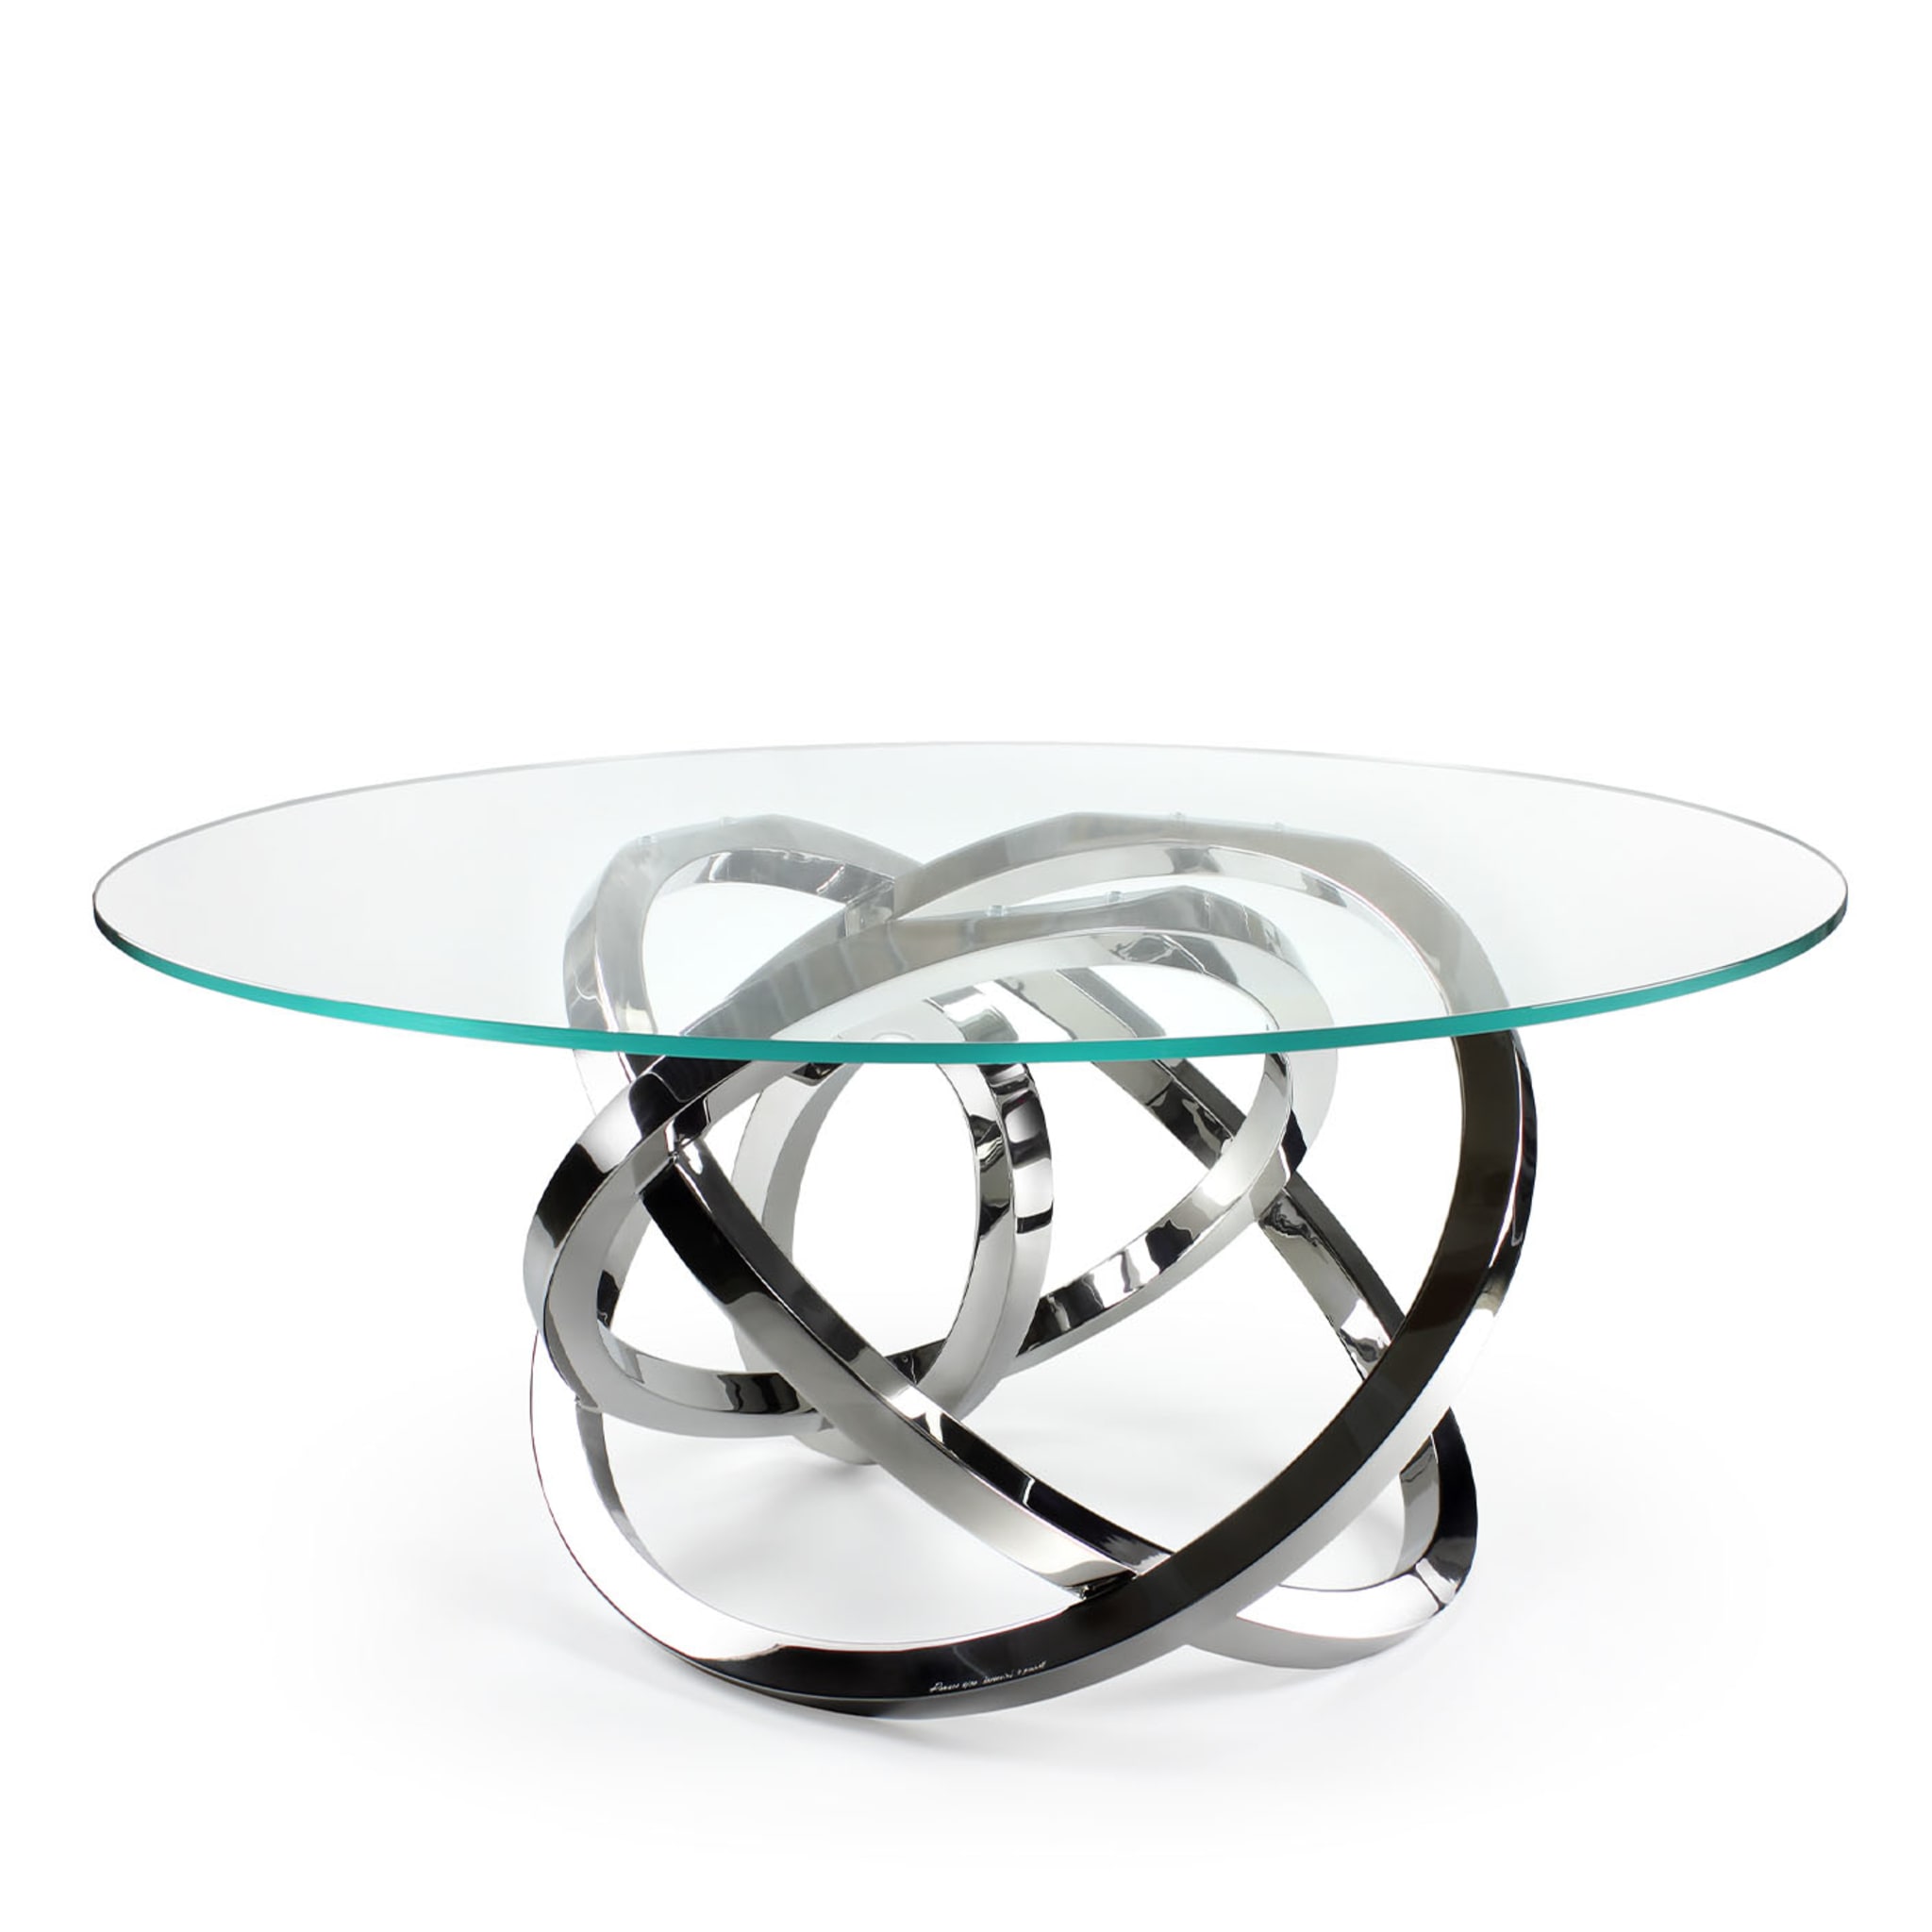 Perseo Dining Table - Alternative view 4